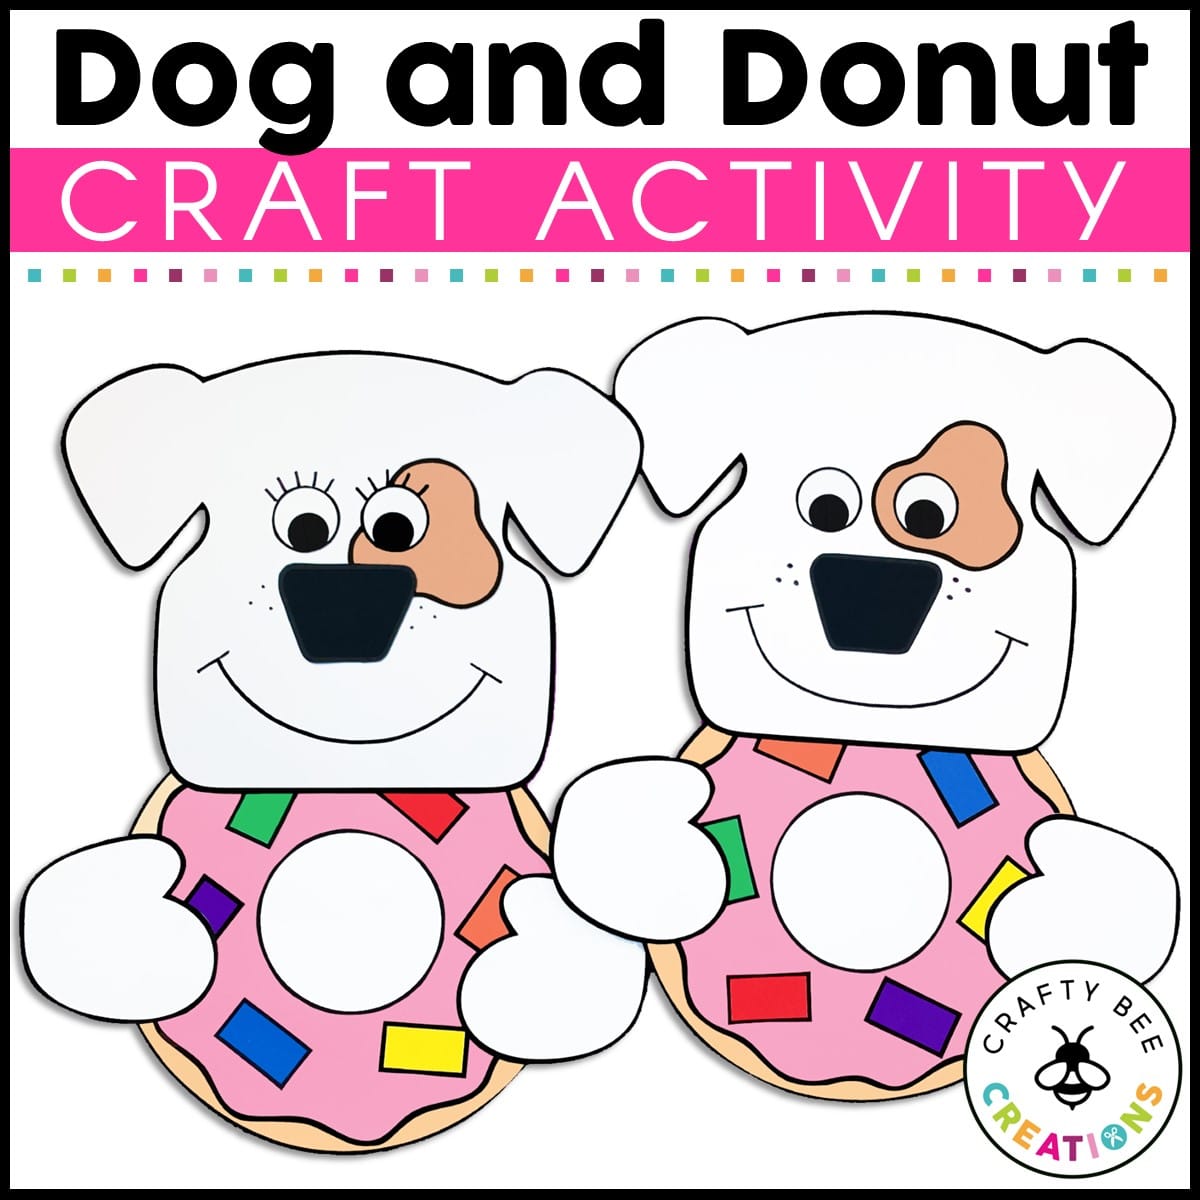 dog-and-donut-craft-activity-crafty-bee-creations